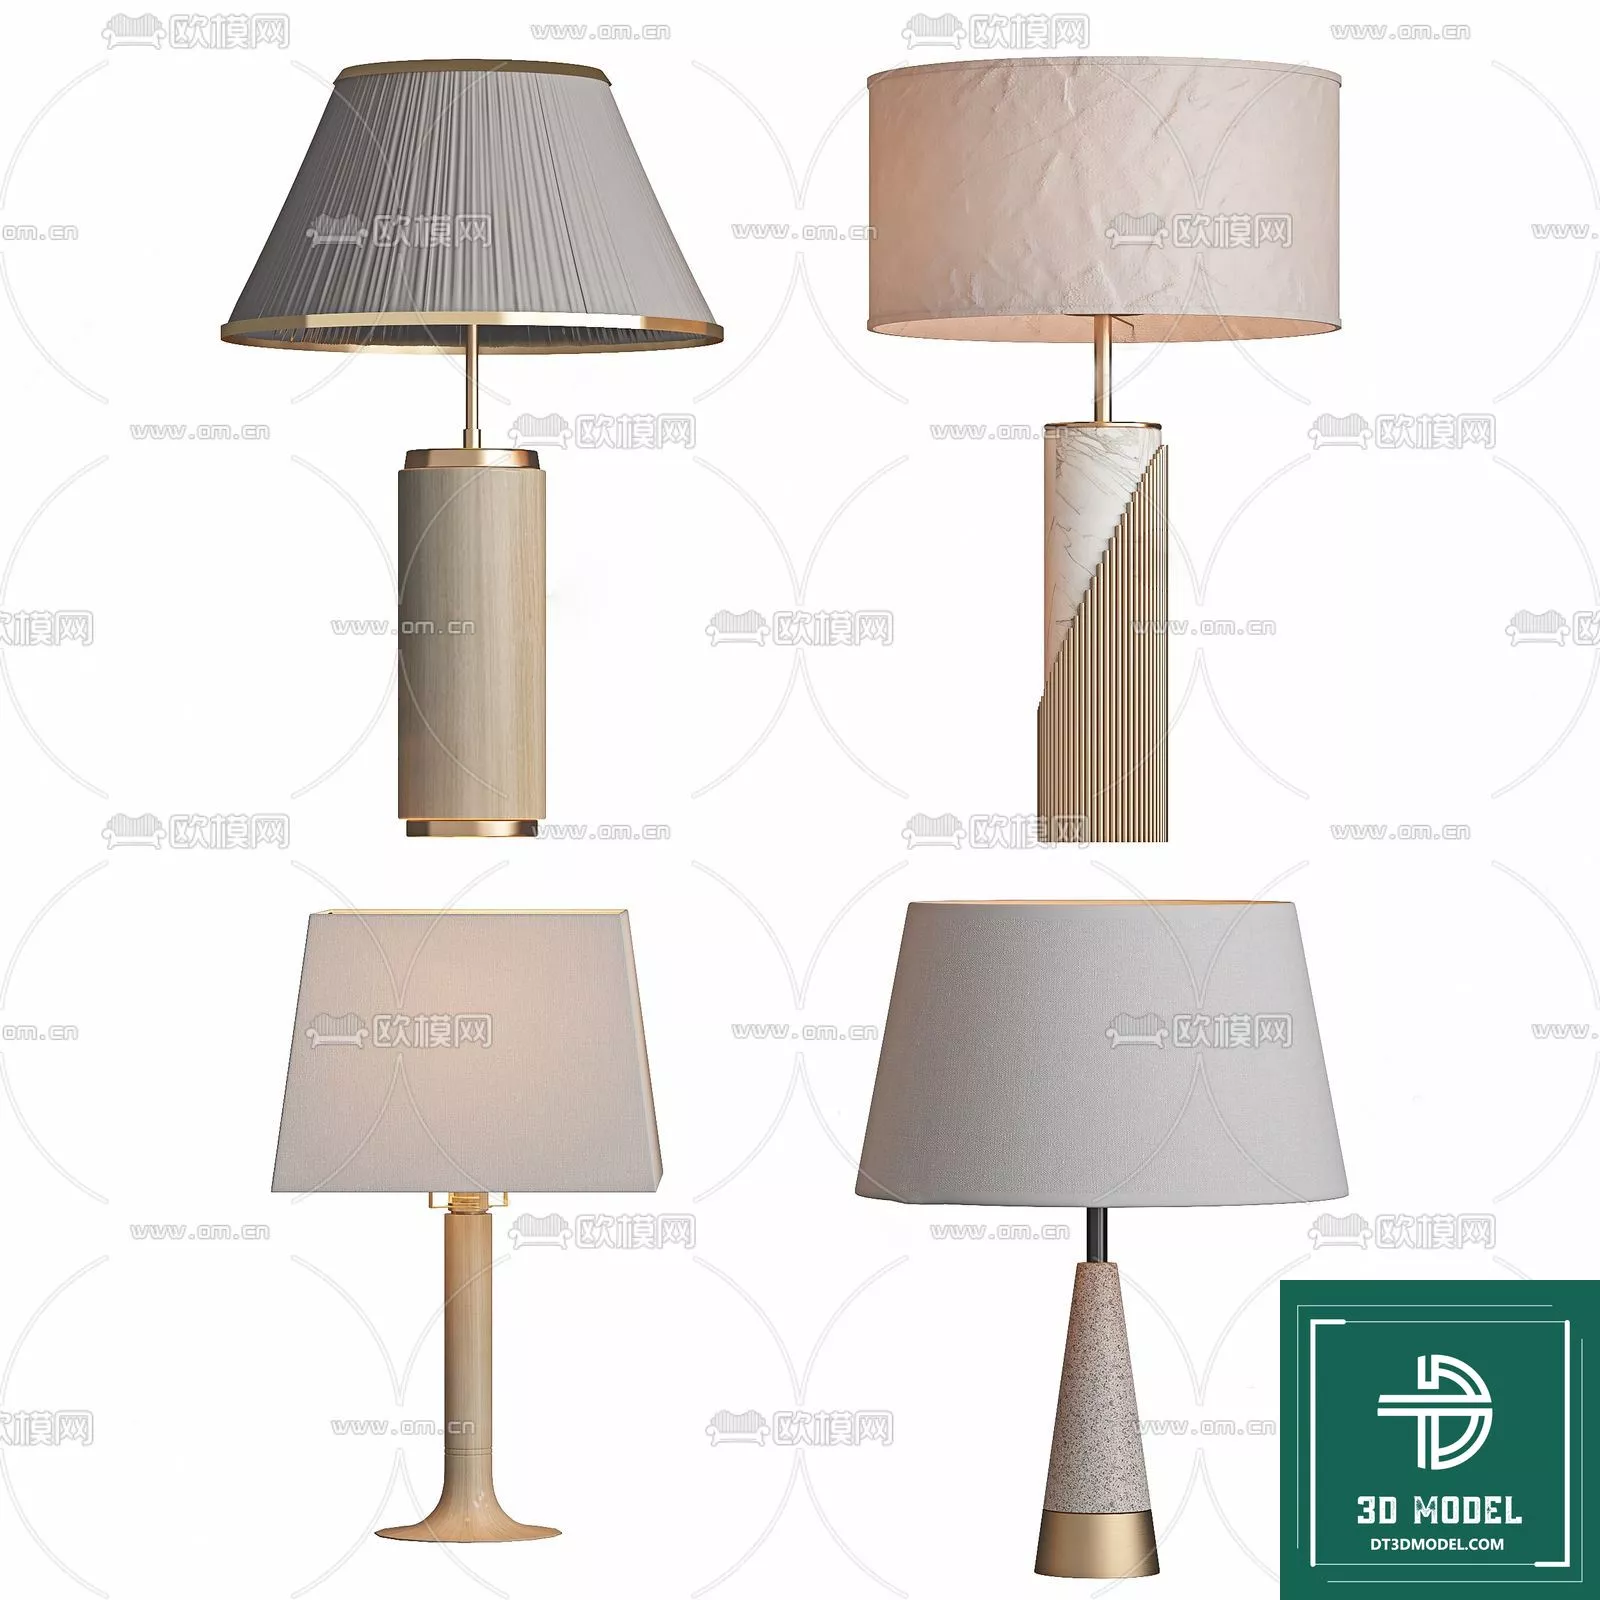 MODERN TABLE LAMP - SKETCHUP 3D MODEL - VRAY OR ENSCAPE - ID14503